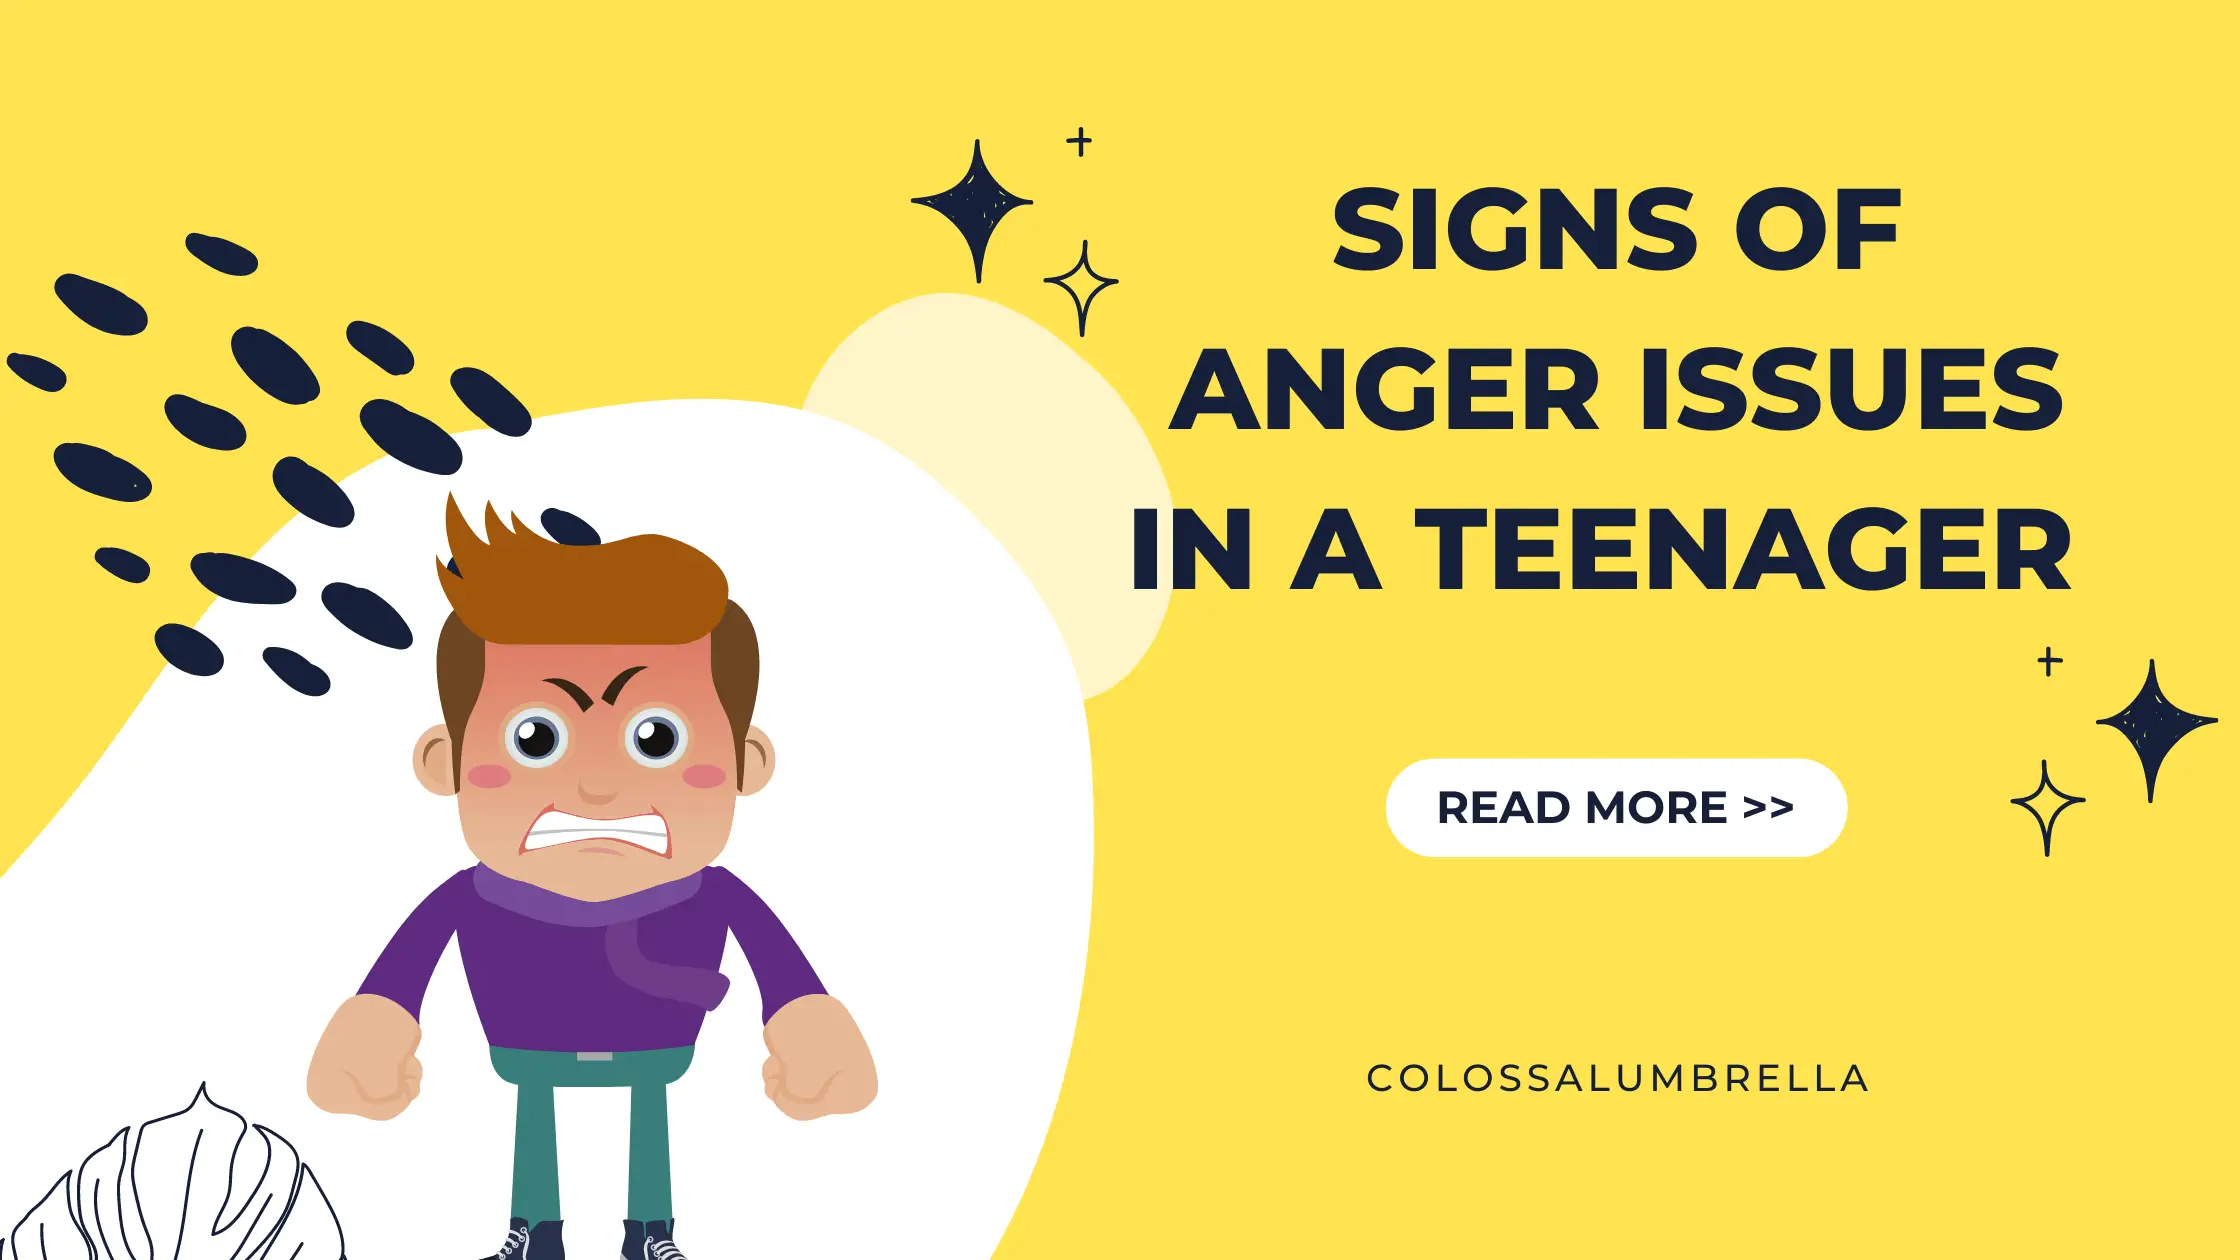 signs of anger issues in a teenager